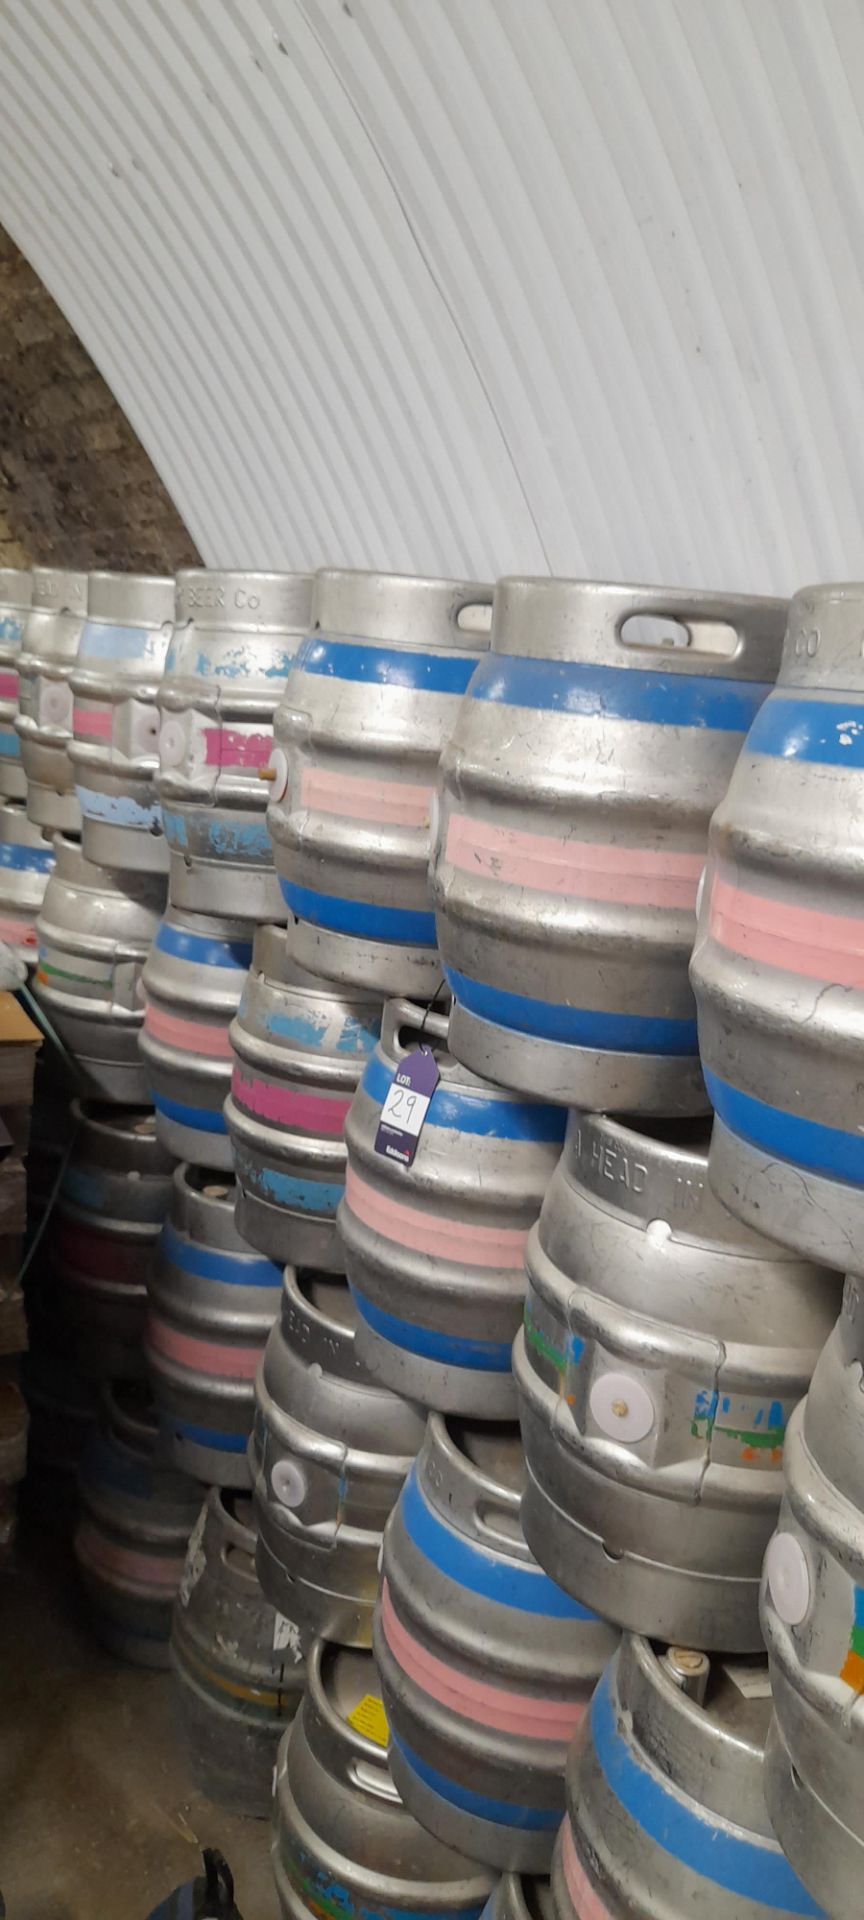 Approximately Ninety Stainless Steel 9 Gallon Casks (Cru